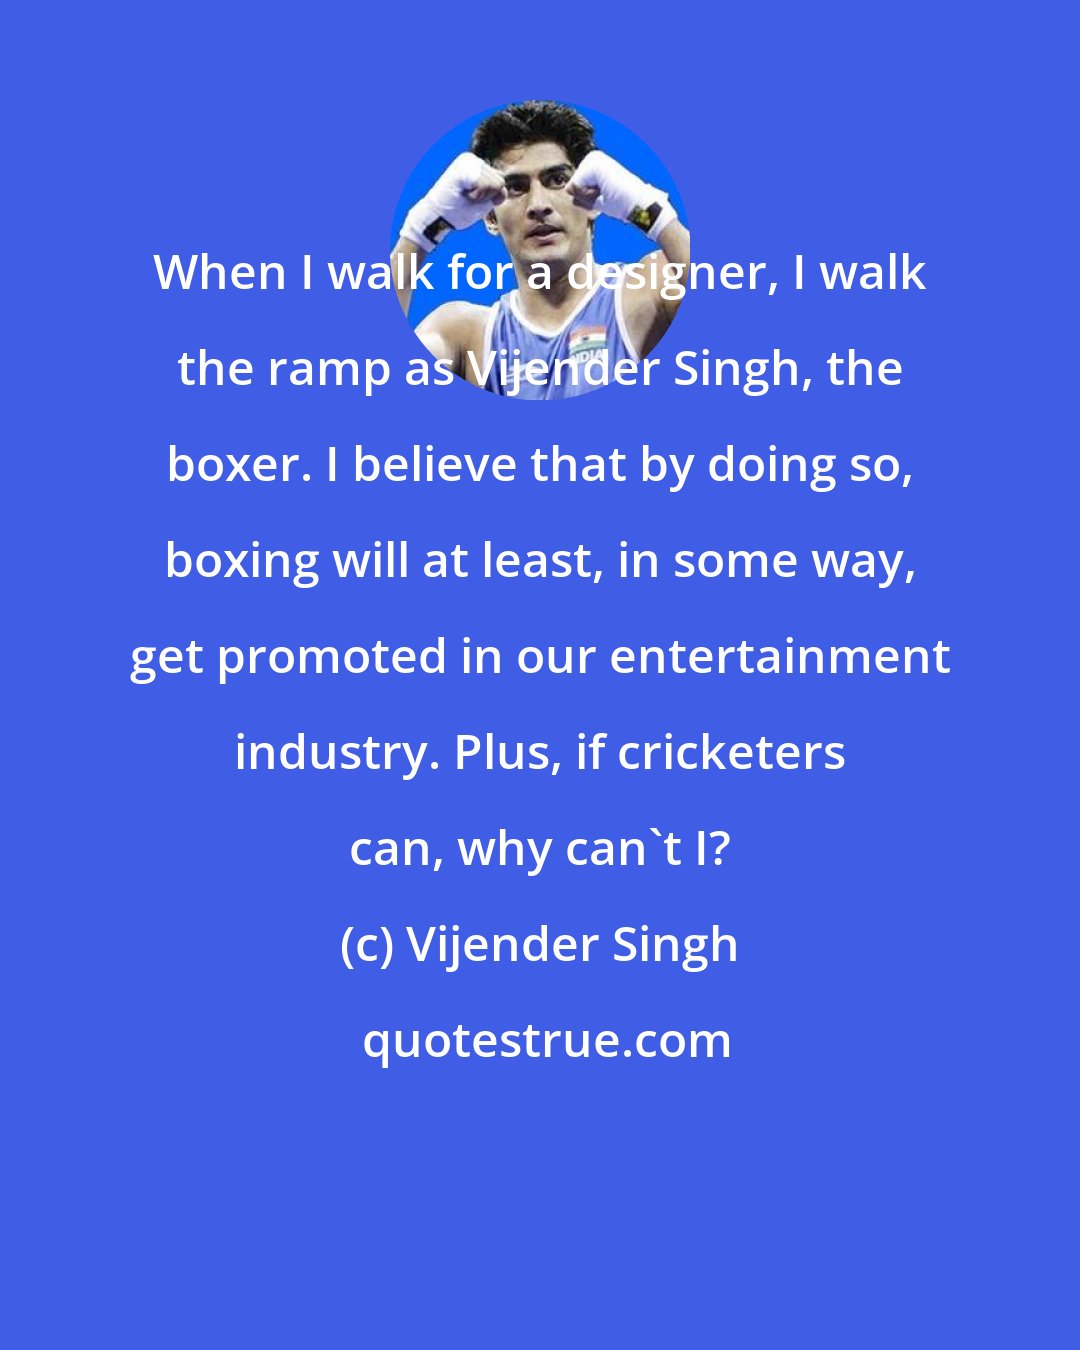 Vijender Singh: When I walk for a designer, I walk the ramp as Vijender Singh, the boxer. I believe that by doing so, boxing will at least, in some way, get promoted in our entertainment industry. Plus, if cricketers can, why can't I?